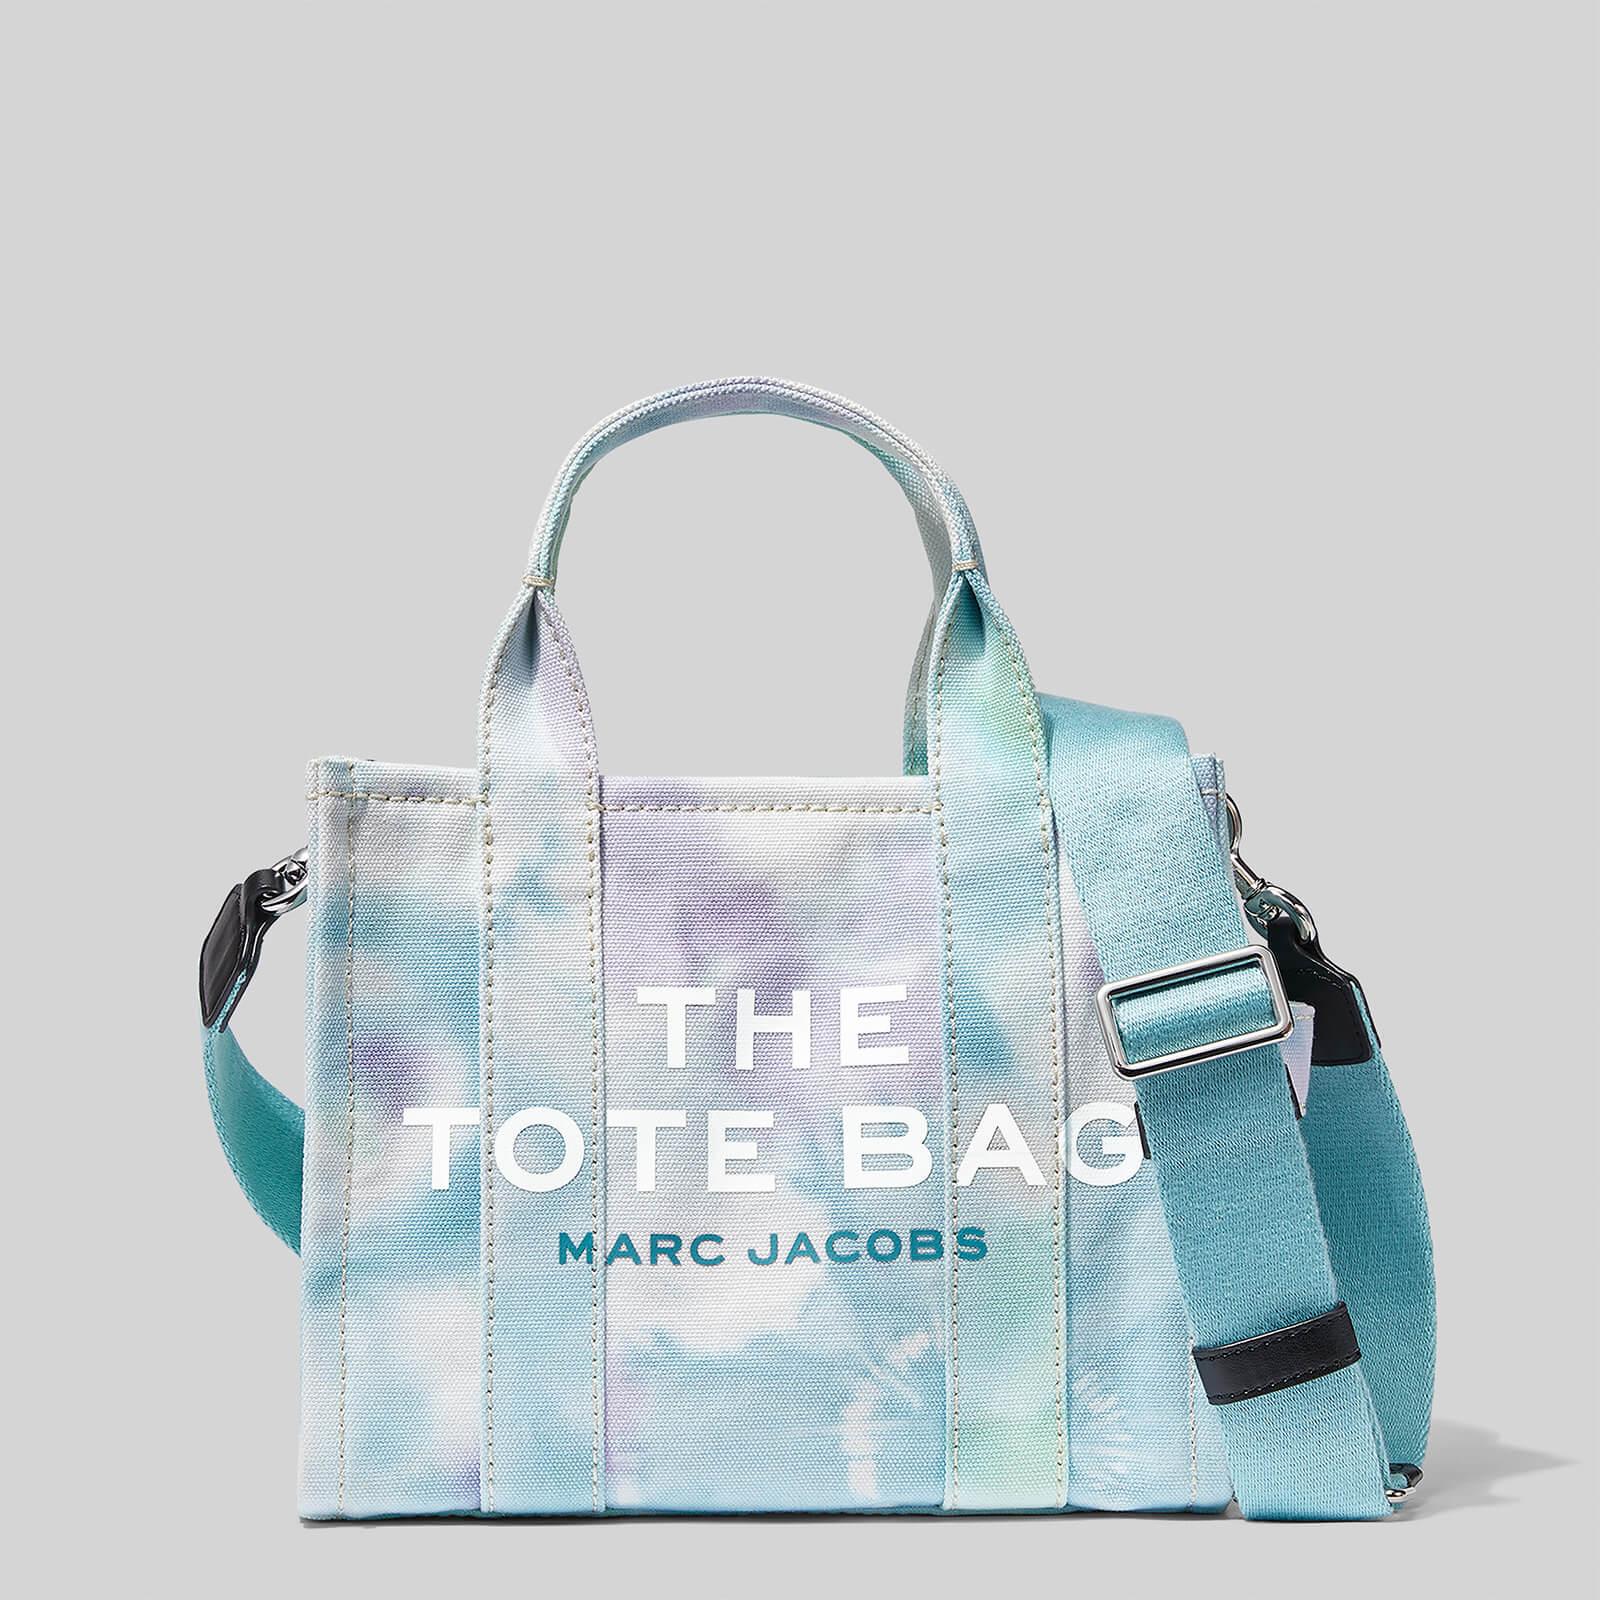 Marc Jacobs The Tie Dye Small Tote Bag in Pink